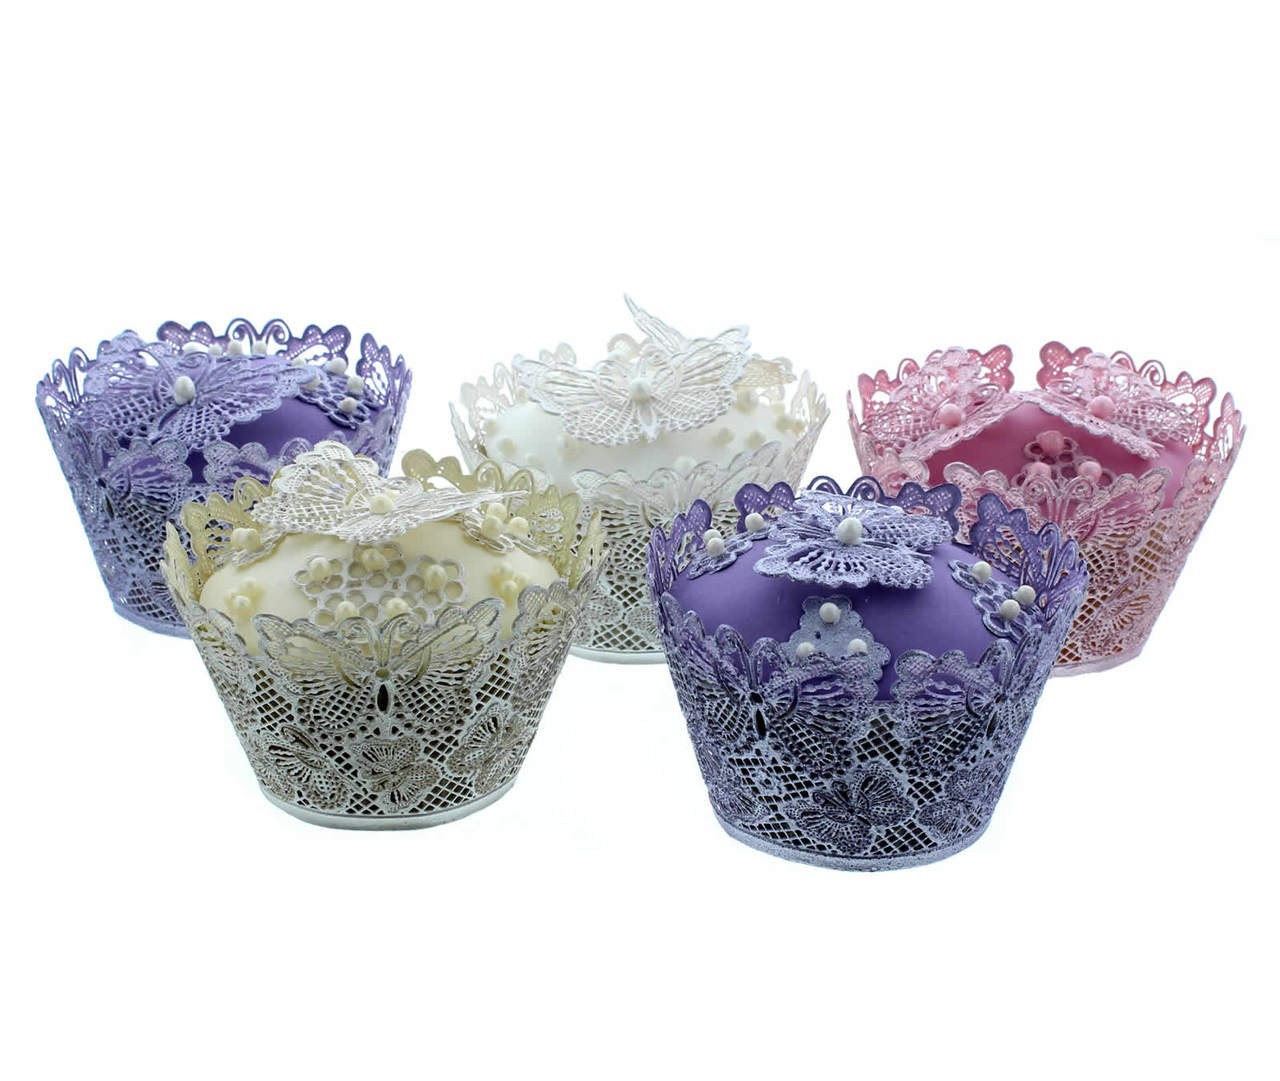 Cake Lace Claire Bowman mat Butterfly cupcake wrappers